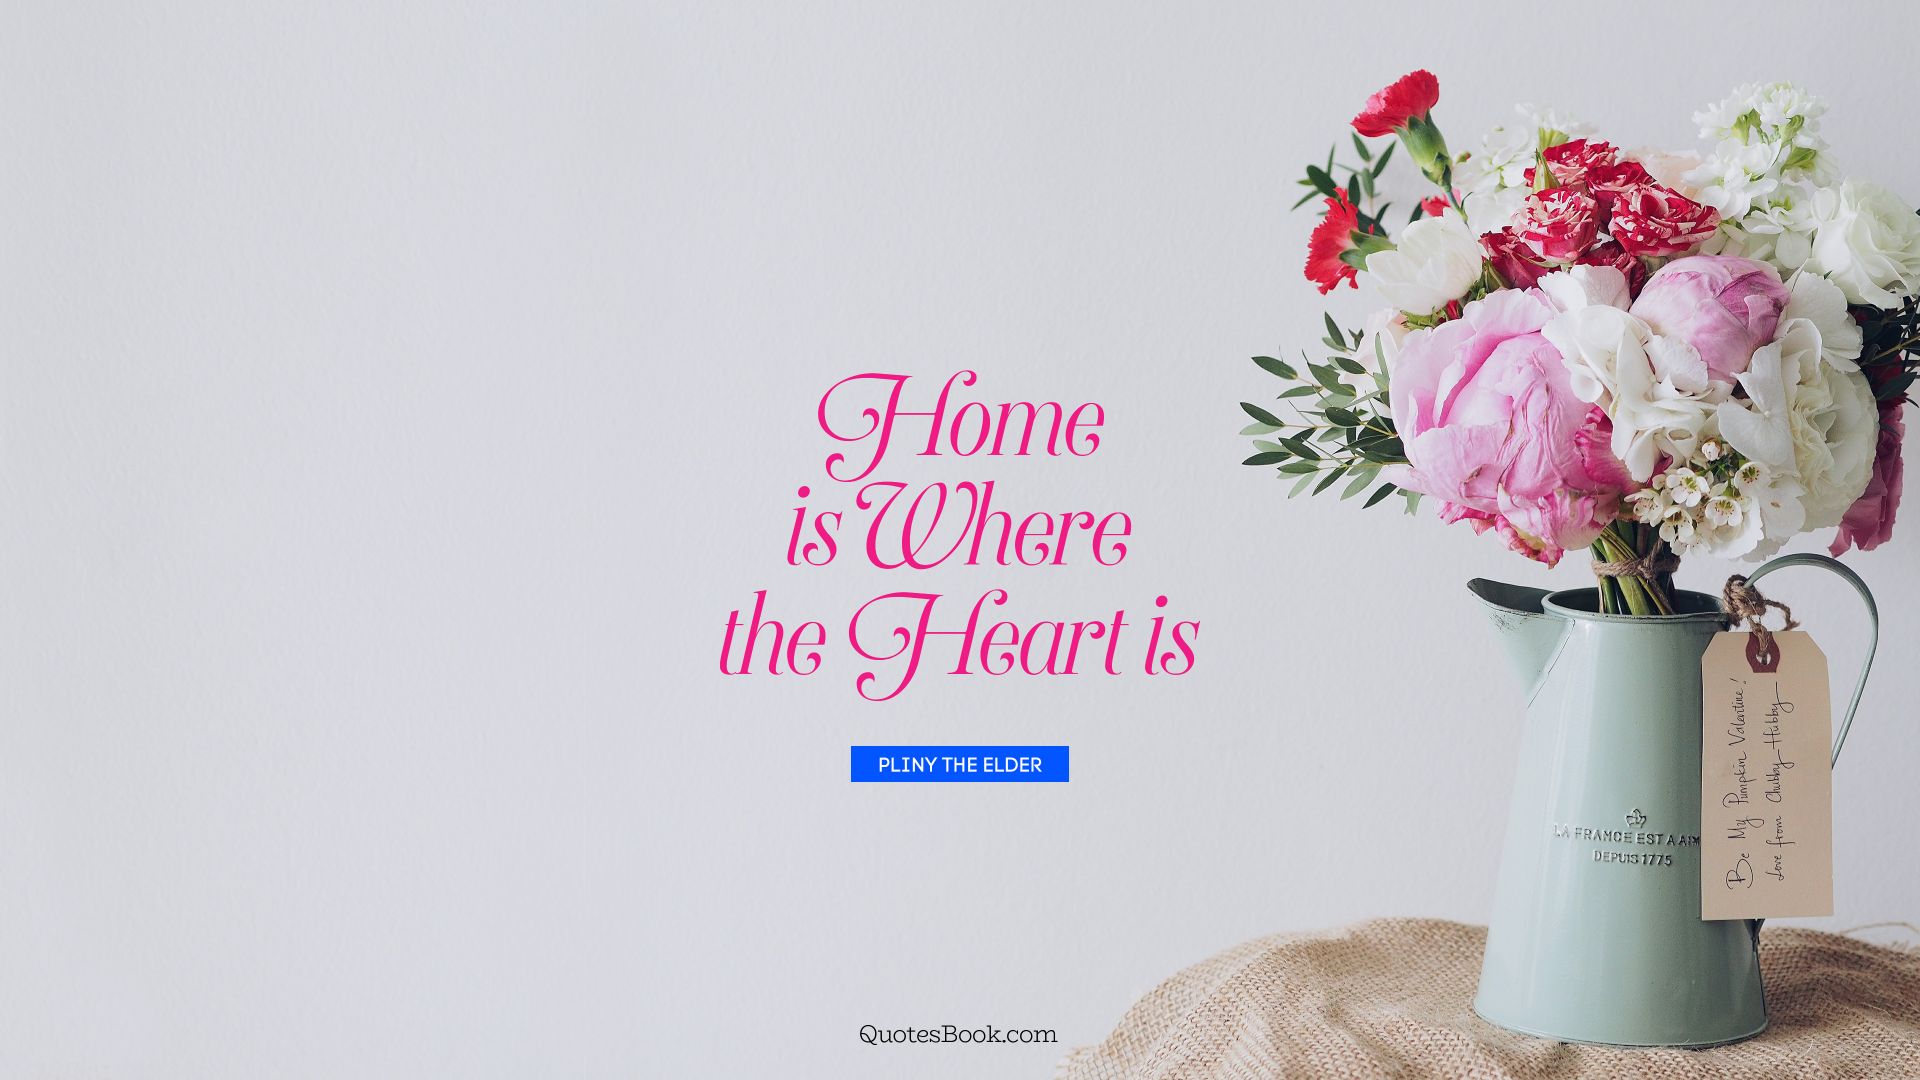 Home is where the heart is. - Quote by Pliny the Elder